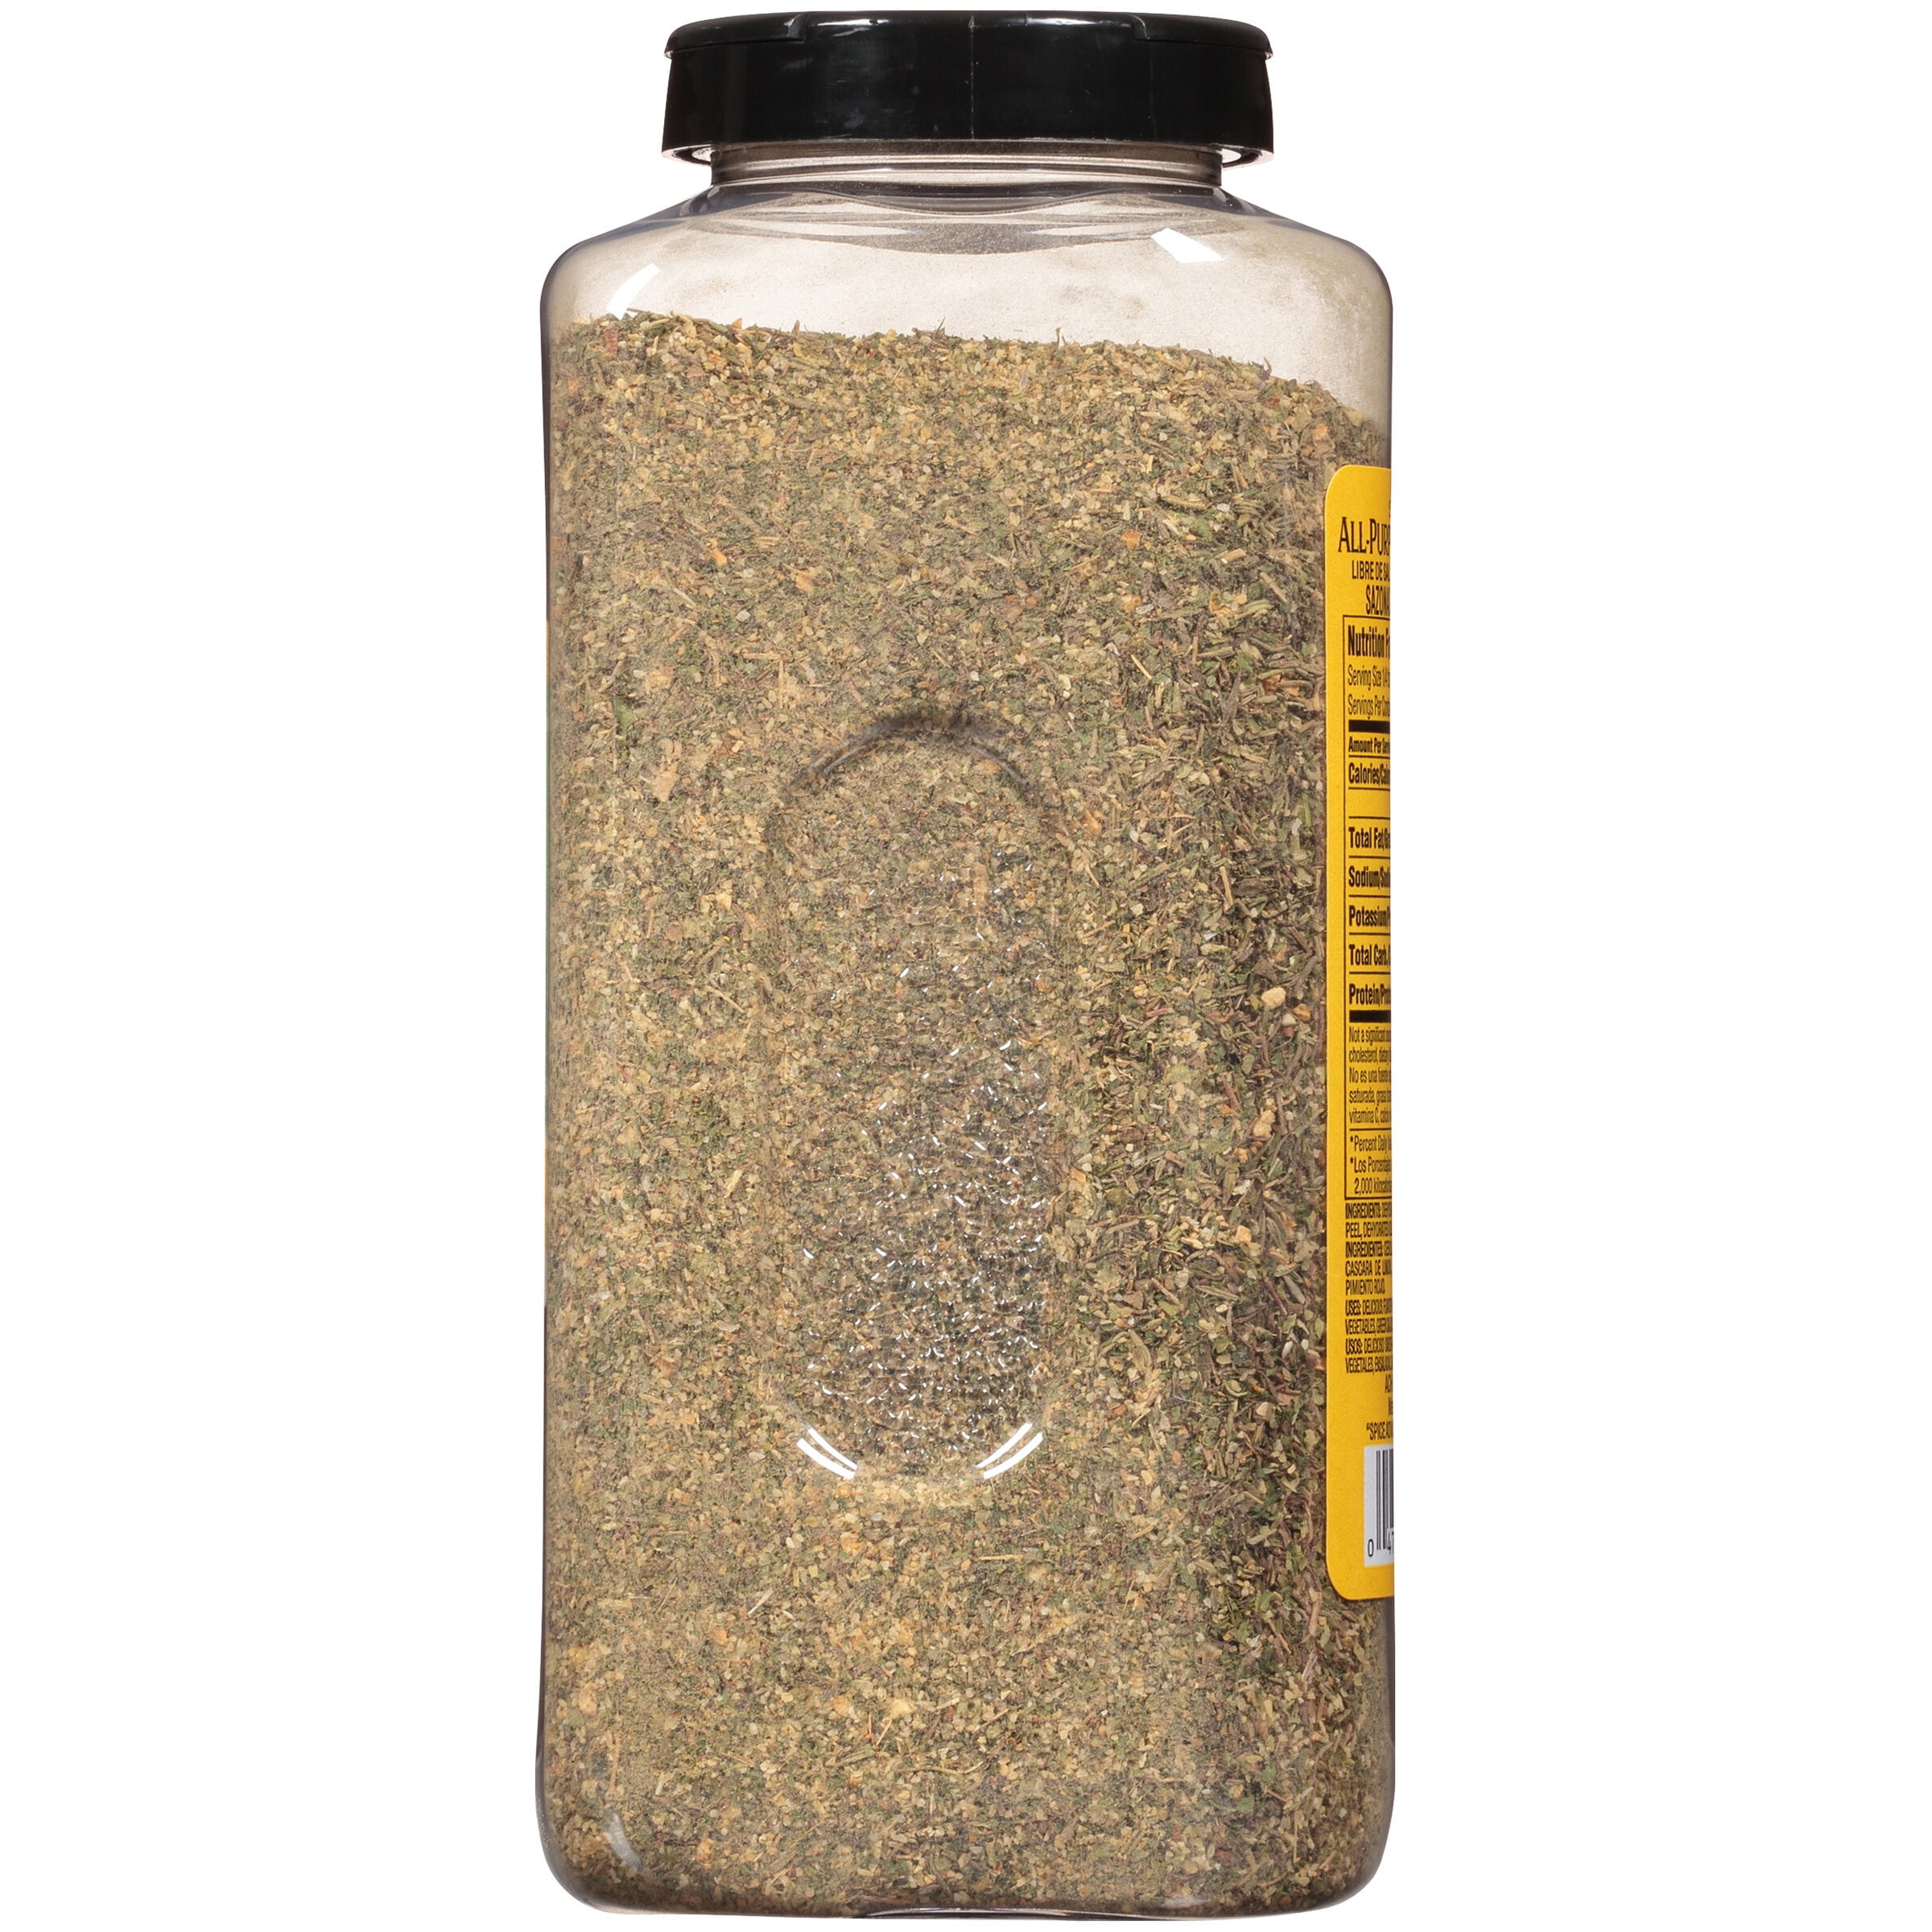 ALL PURPOSE SEASONING - Low Sodium. The raw ingredients are: 50% Singl –  Fennon's House of Spice